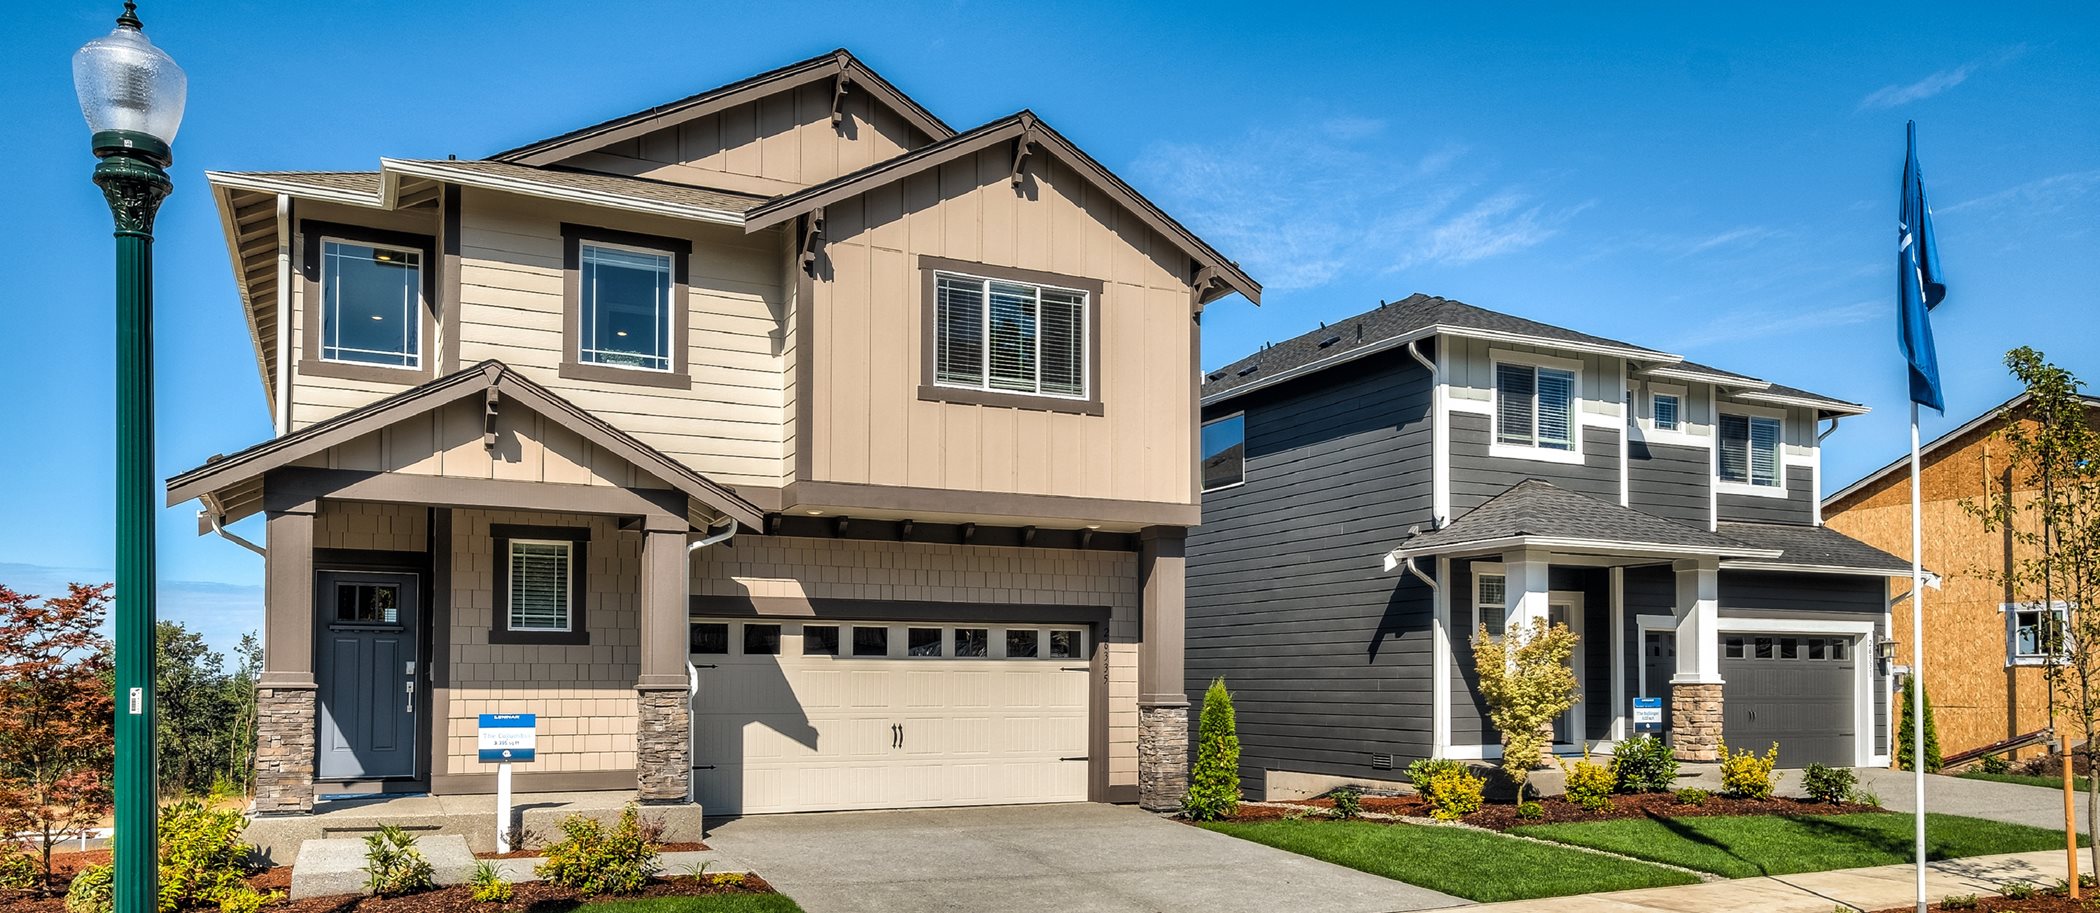 New homes in King County